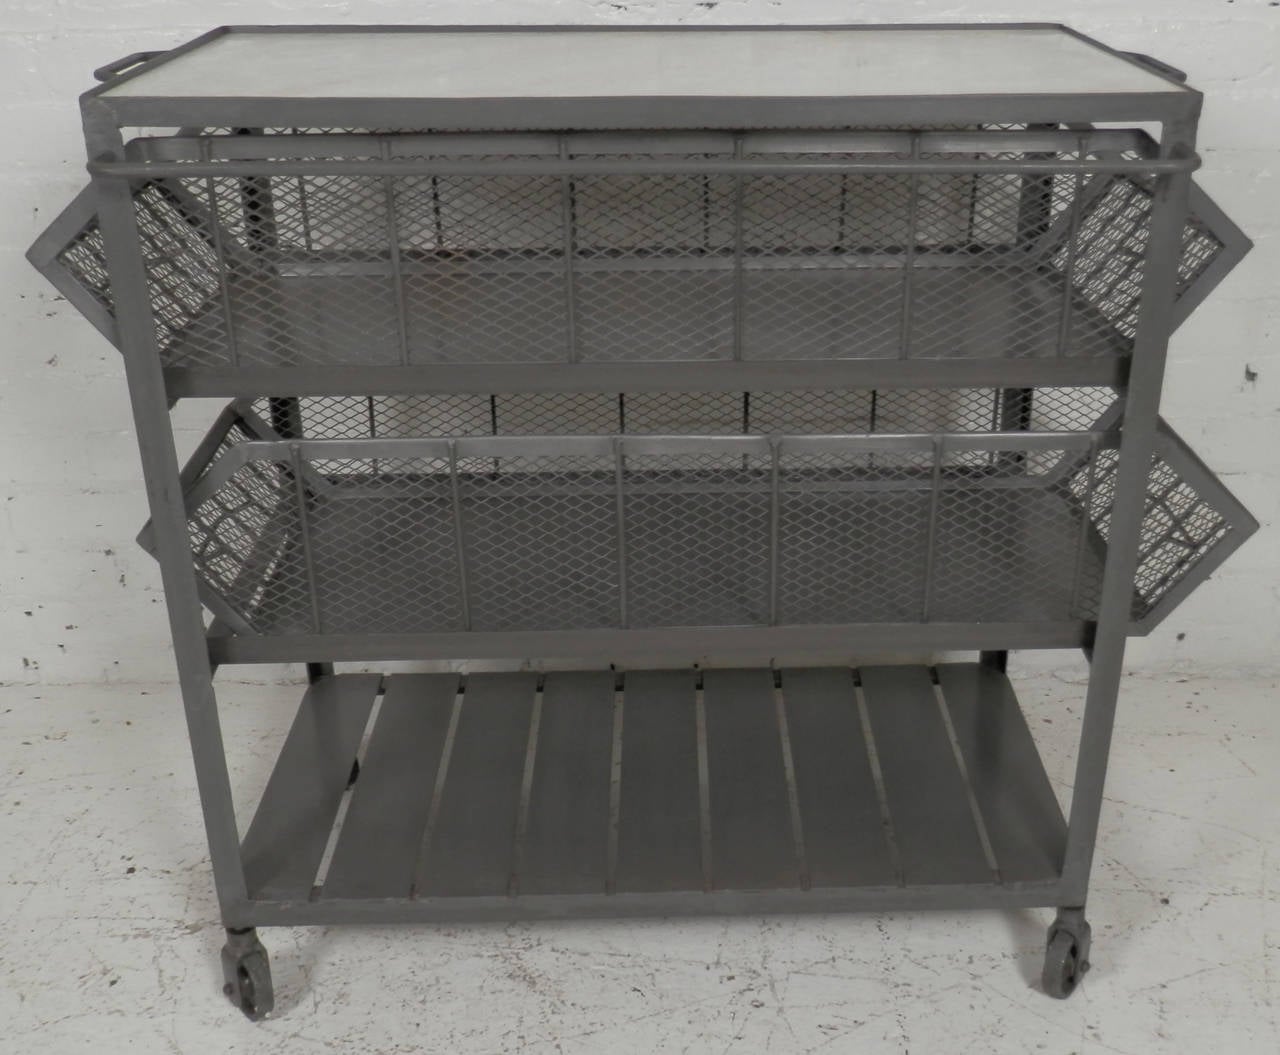 Metal trolly on wheels featuring two large mesh sided drawers, lower storage platform and a marble insert on top. Heavy iron, solid construction. Makes a great kitchen island.

(Please confirm item location - NY or NJ - with dealer)